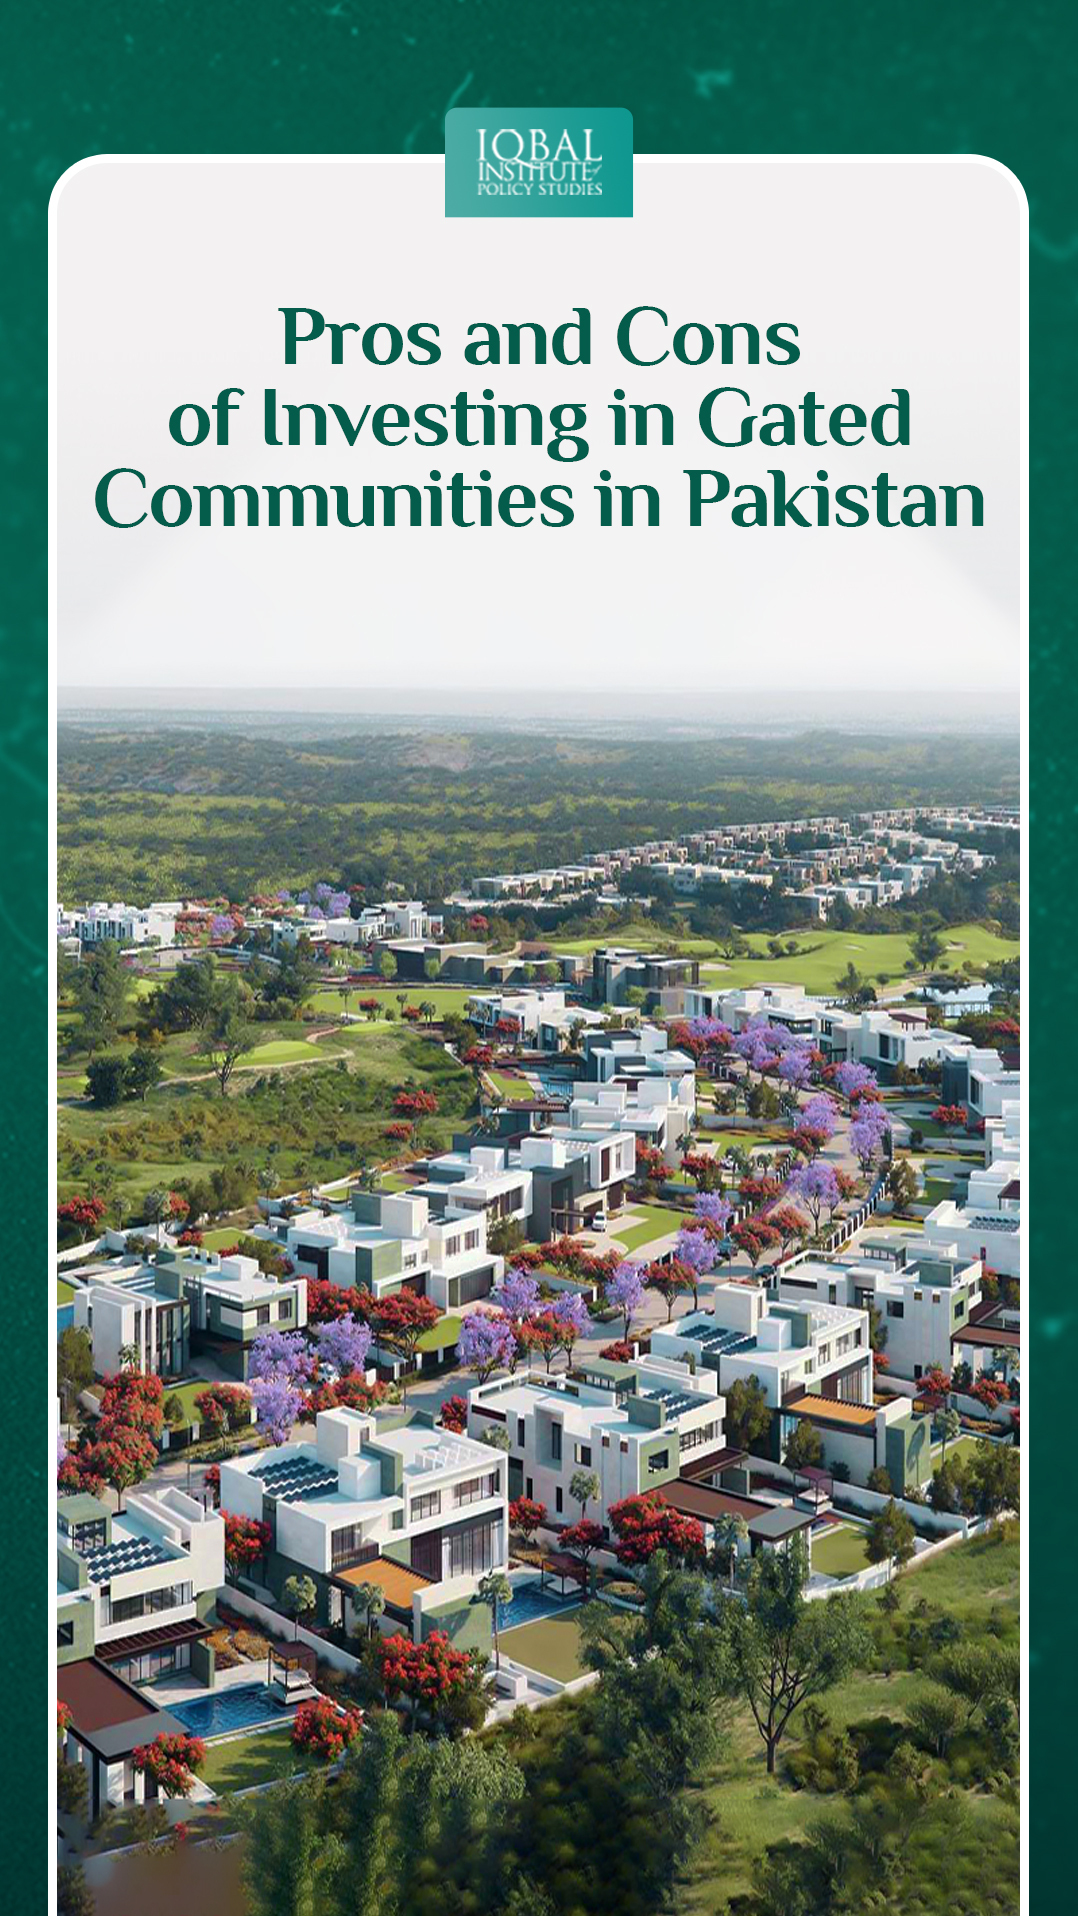 Pros and Cons of Investing in Gated Communities in Pakistan